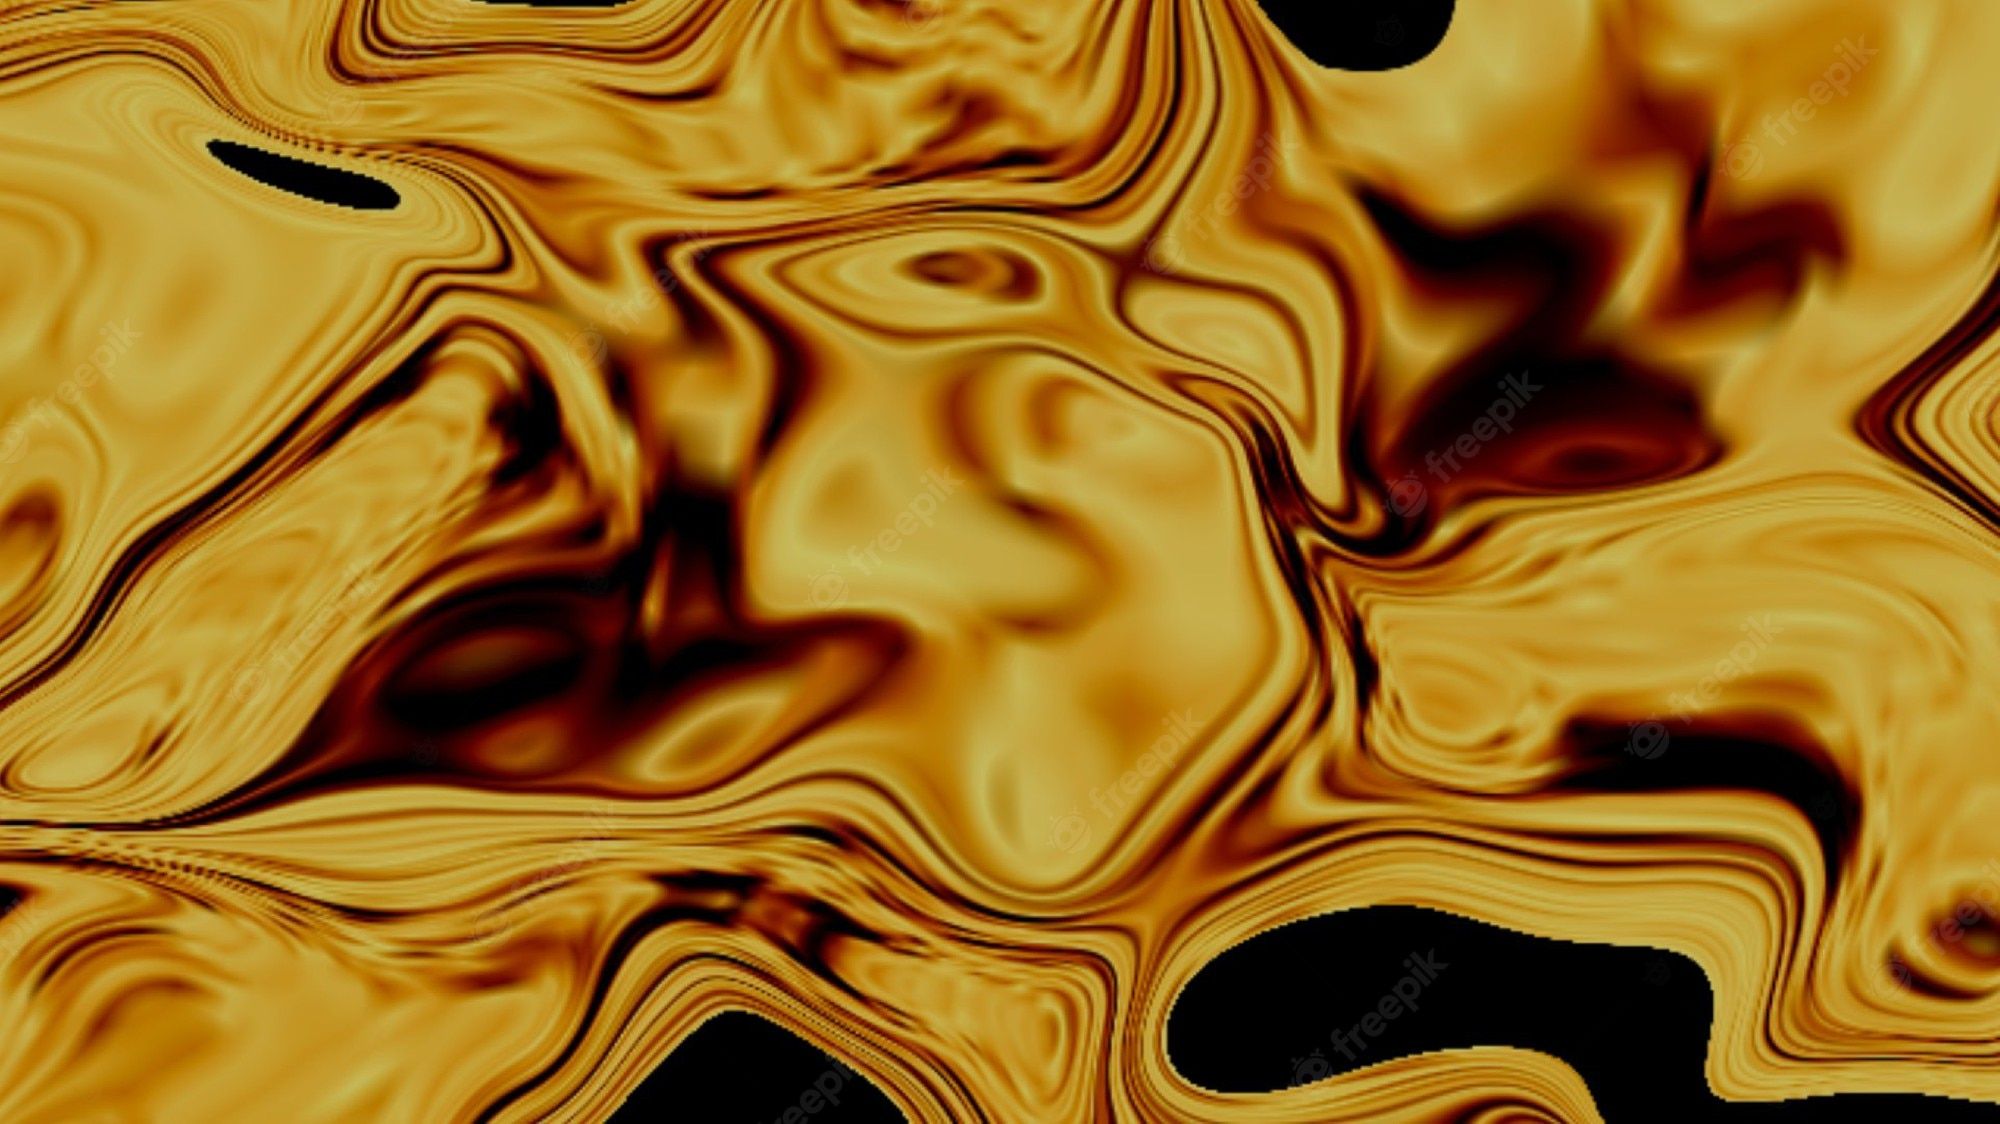 A close up of an abstract pattern - Gold